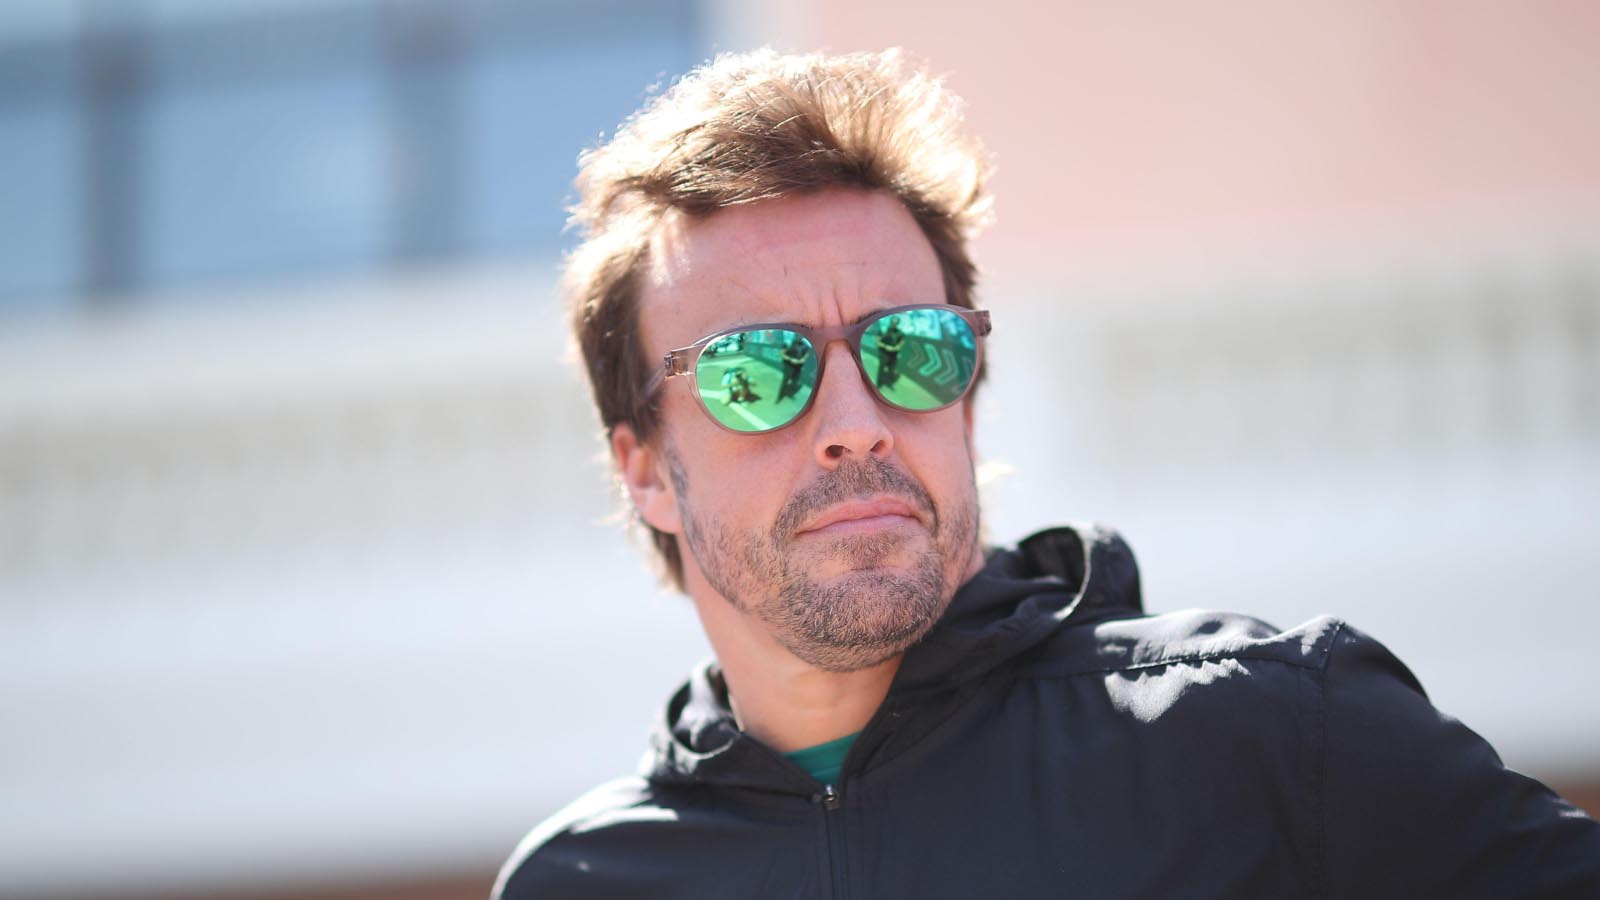 Fernando Alonso's manager lifts lid on actual Honda relationship status